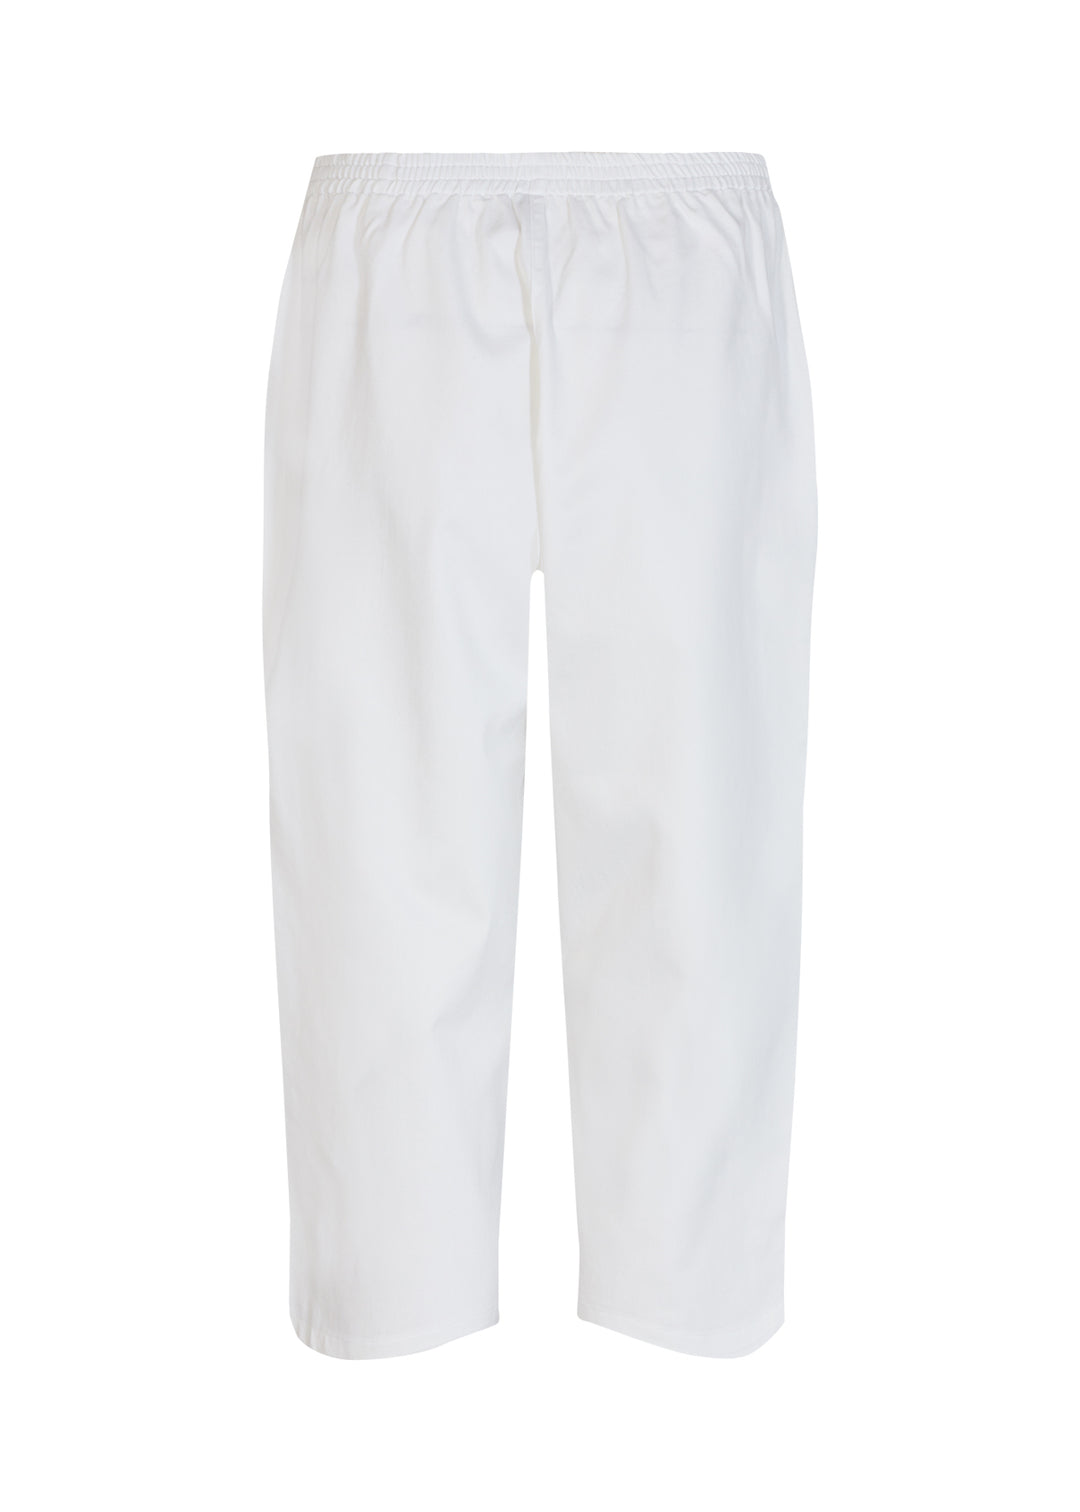 Soya Concept Spring 2024 Made from a comfortable blend of cotton and polyester, these capris feature an elastic waist and hem button details for a relaxed, casual fit. 